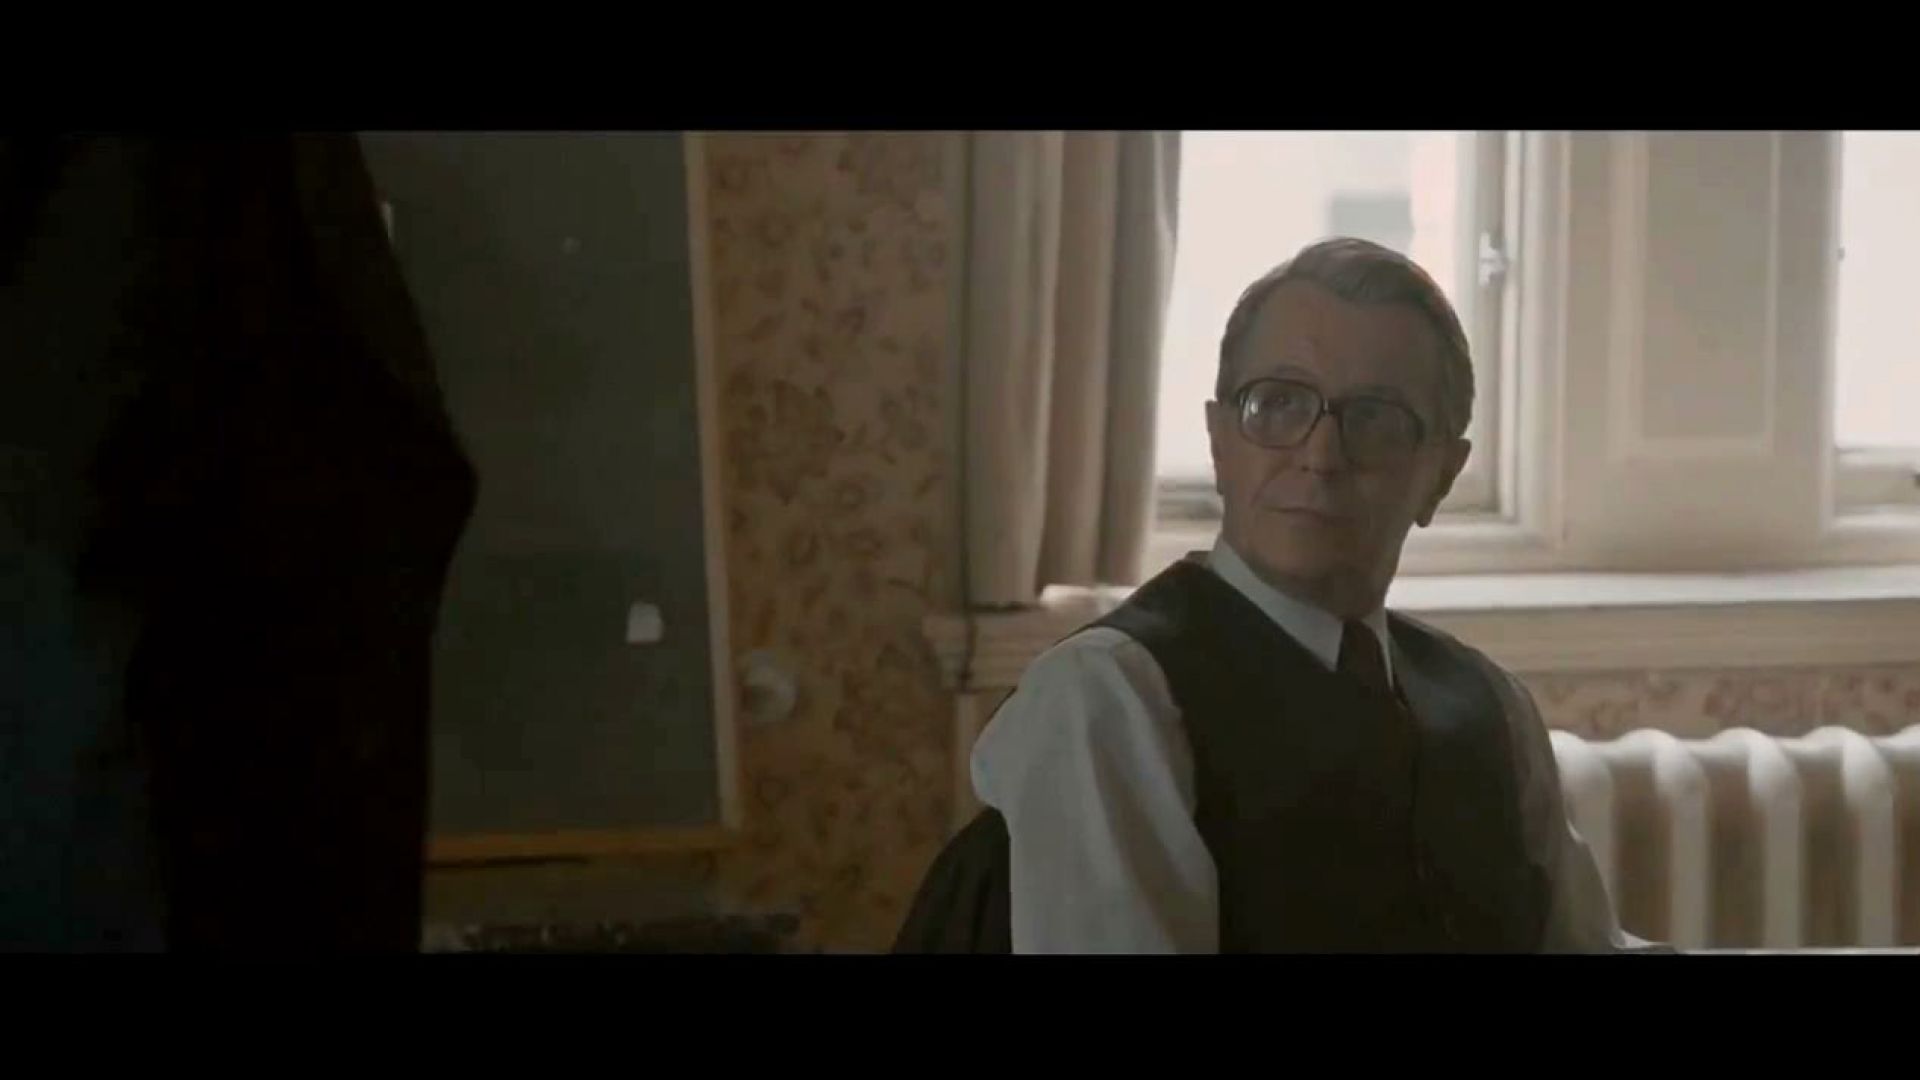 He&#039;s a double agent George. There is no mole. Tinker Tailor Soldier Spy